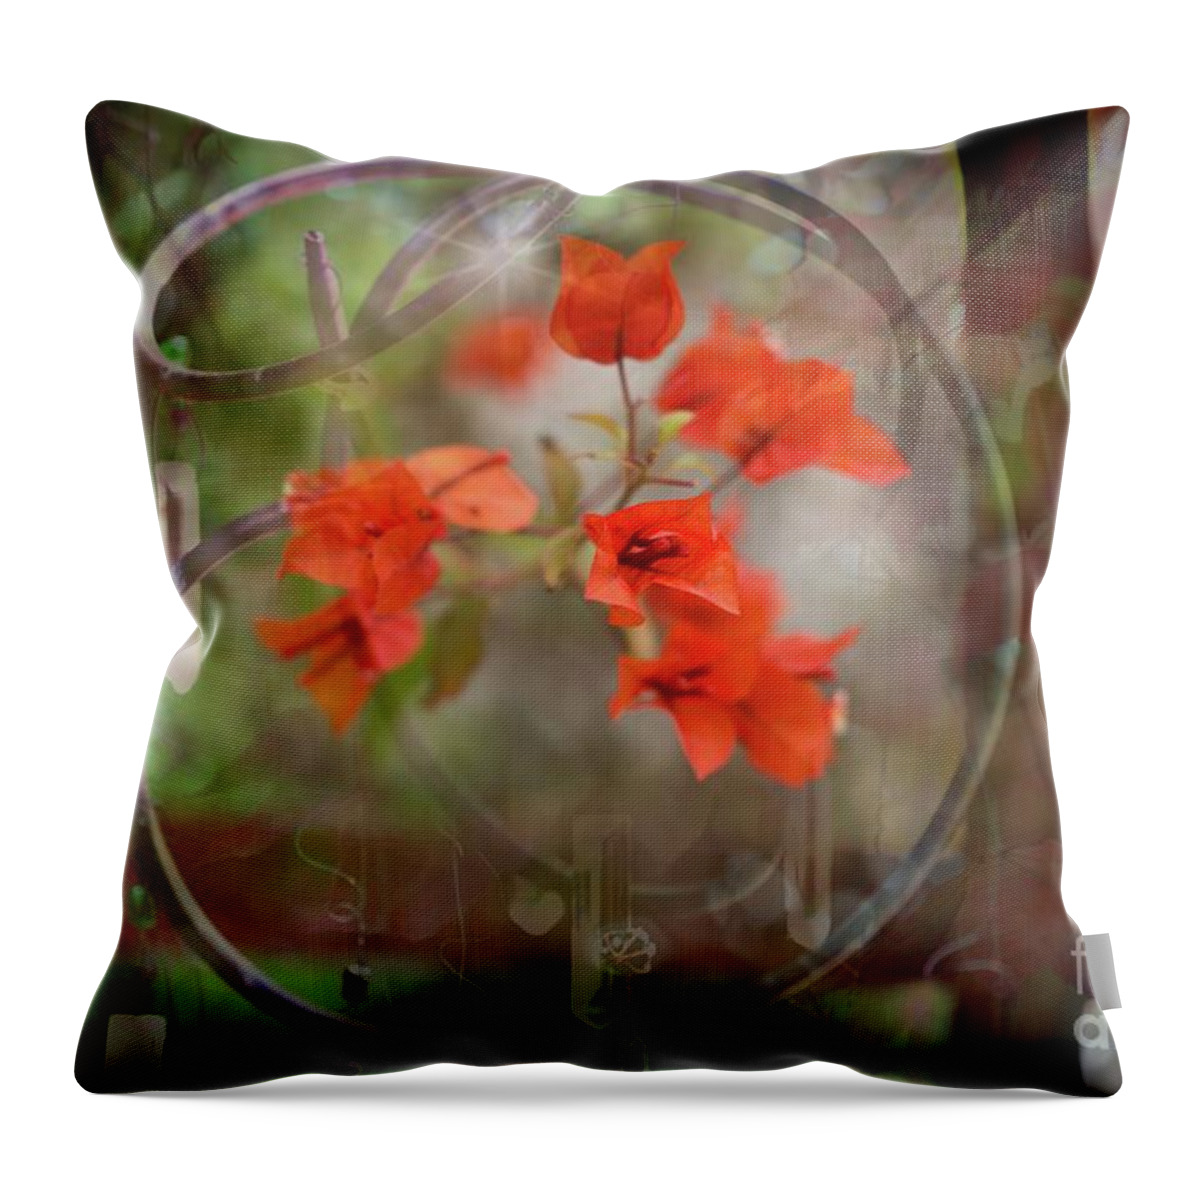 Wind Chimes Throw Pillow featuring the photograph Wind Chimes Through The Window by Mary Lou Chmura